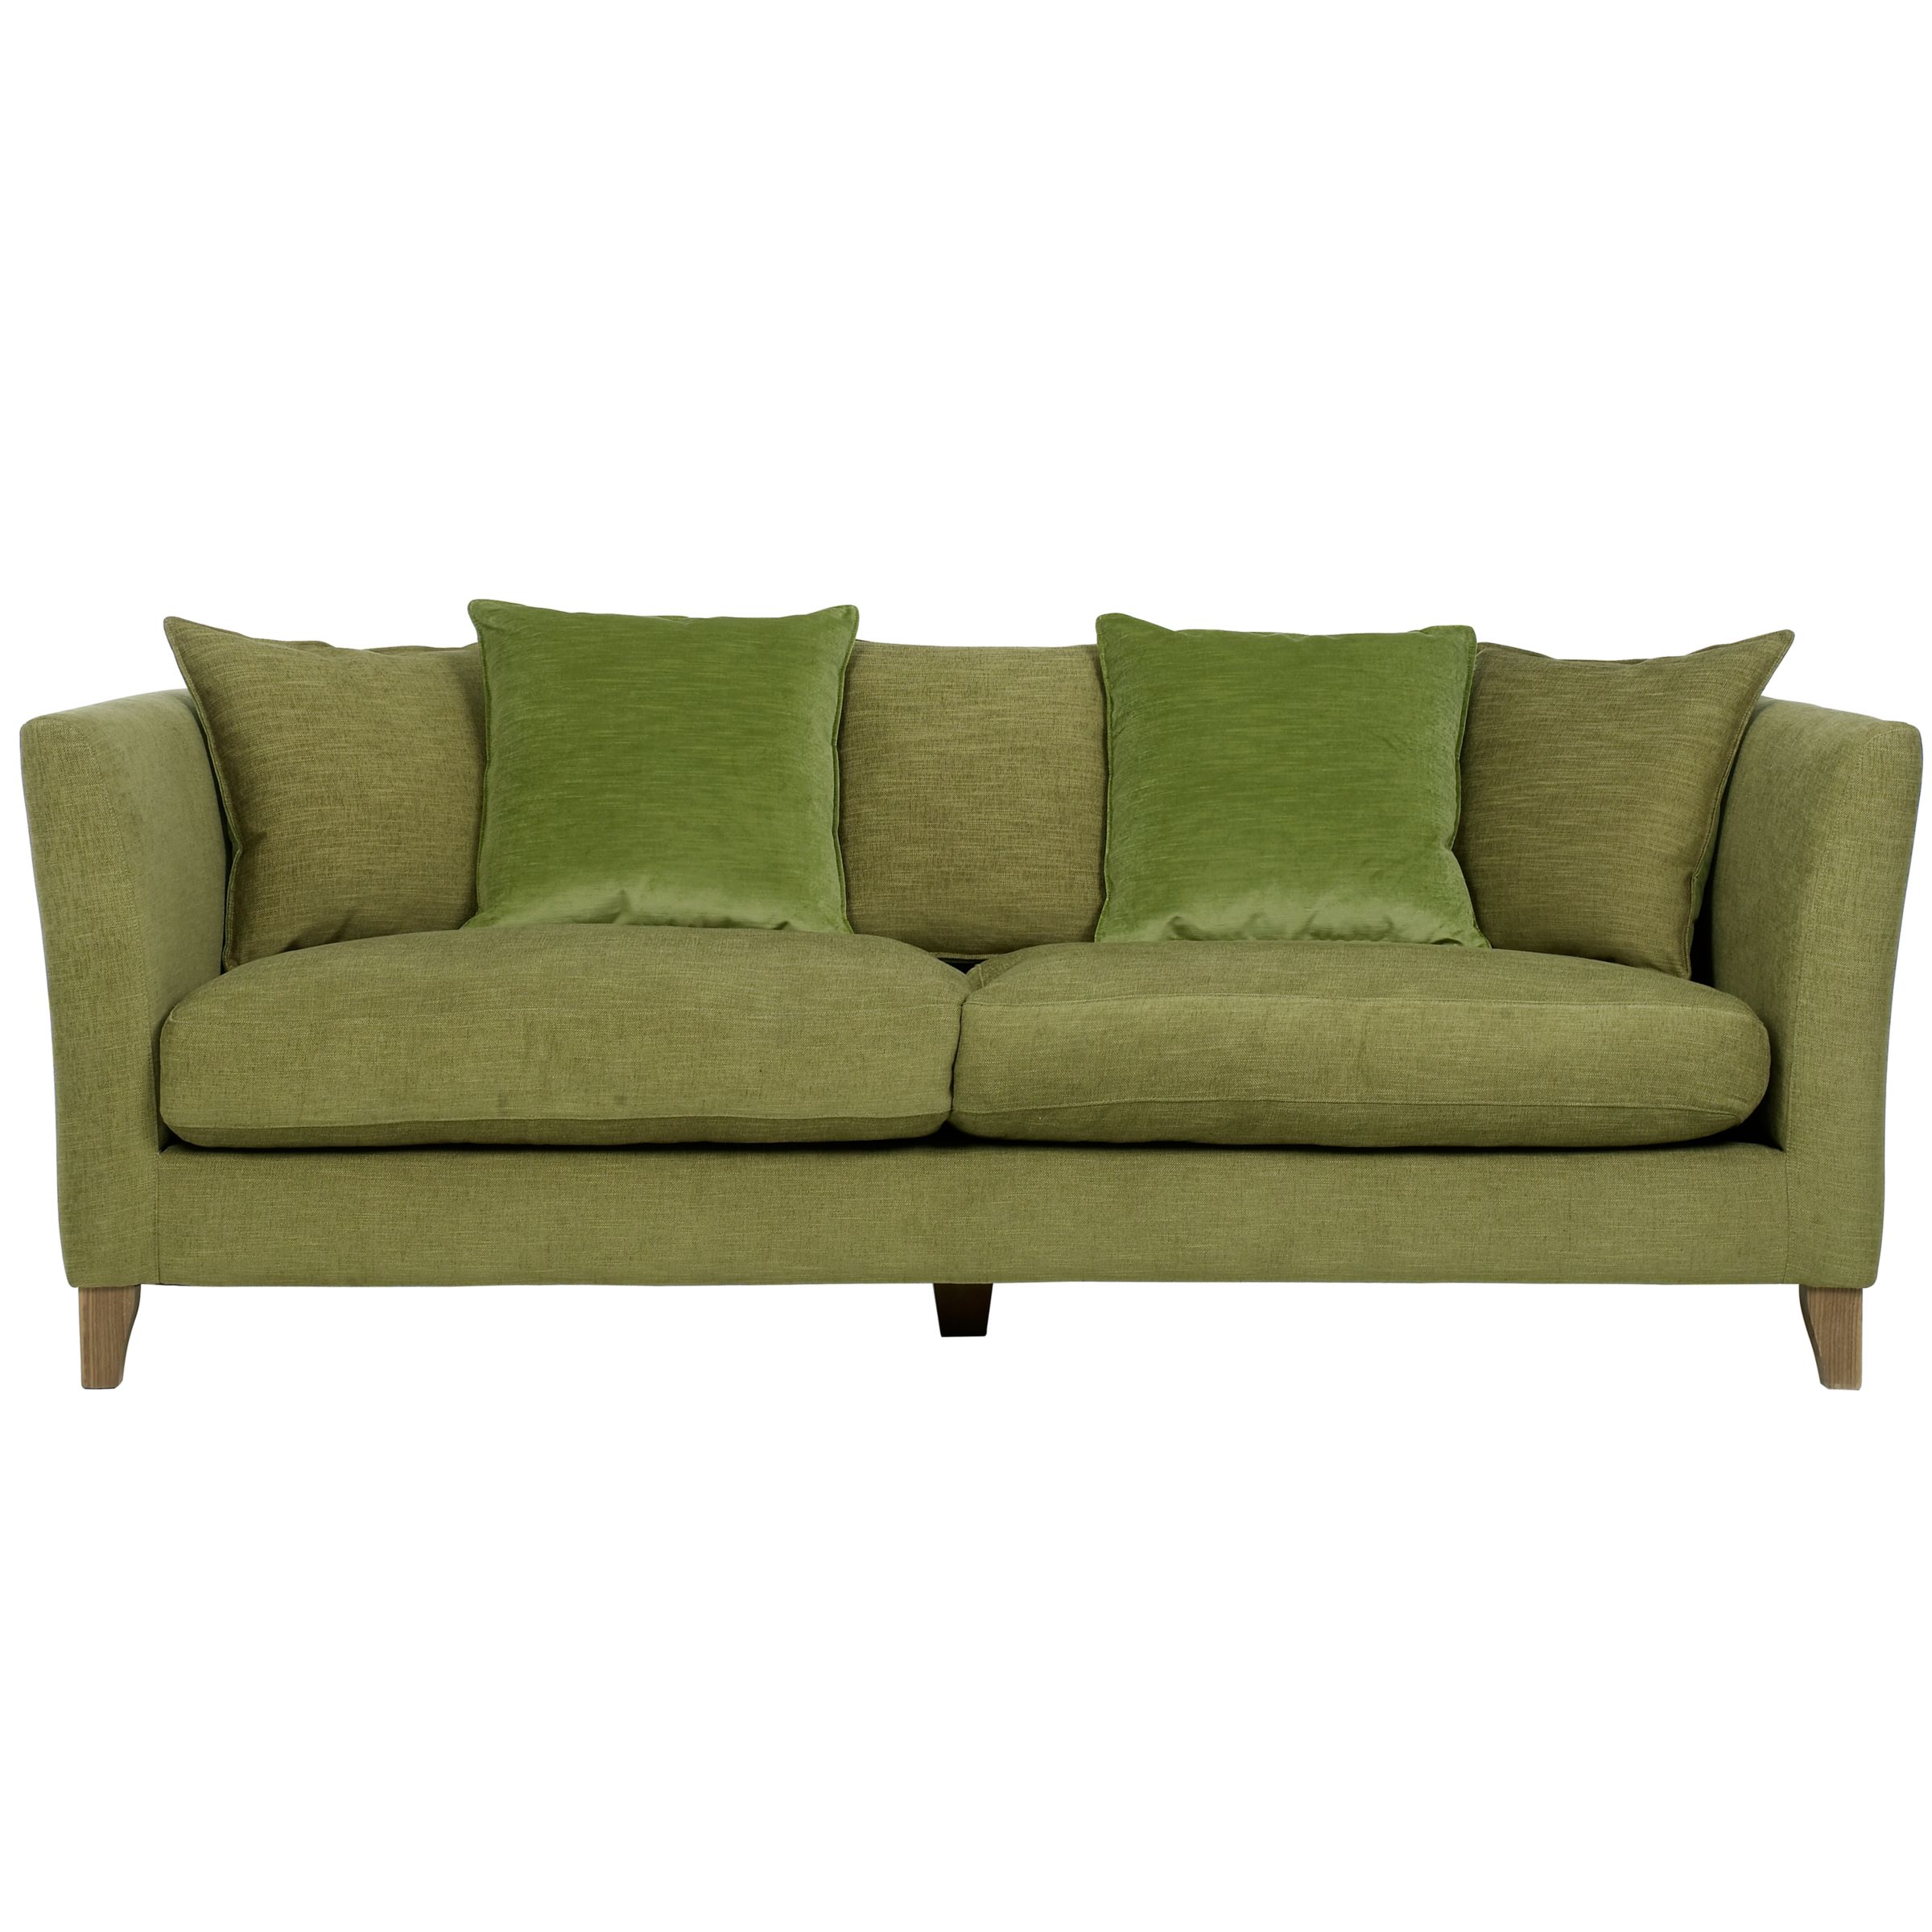 Nick Munro Collection Grand Sofa, Scatter Back, Allegra Willow at John Lewis